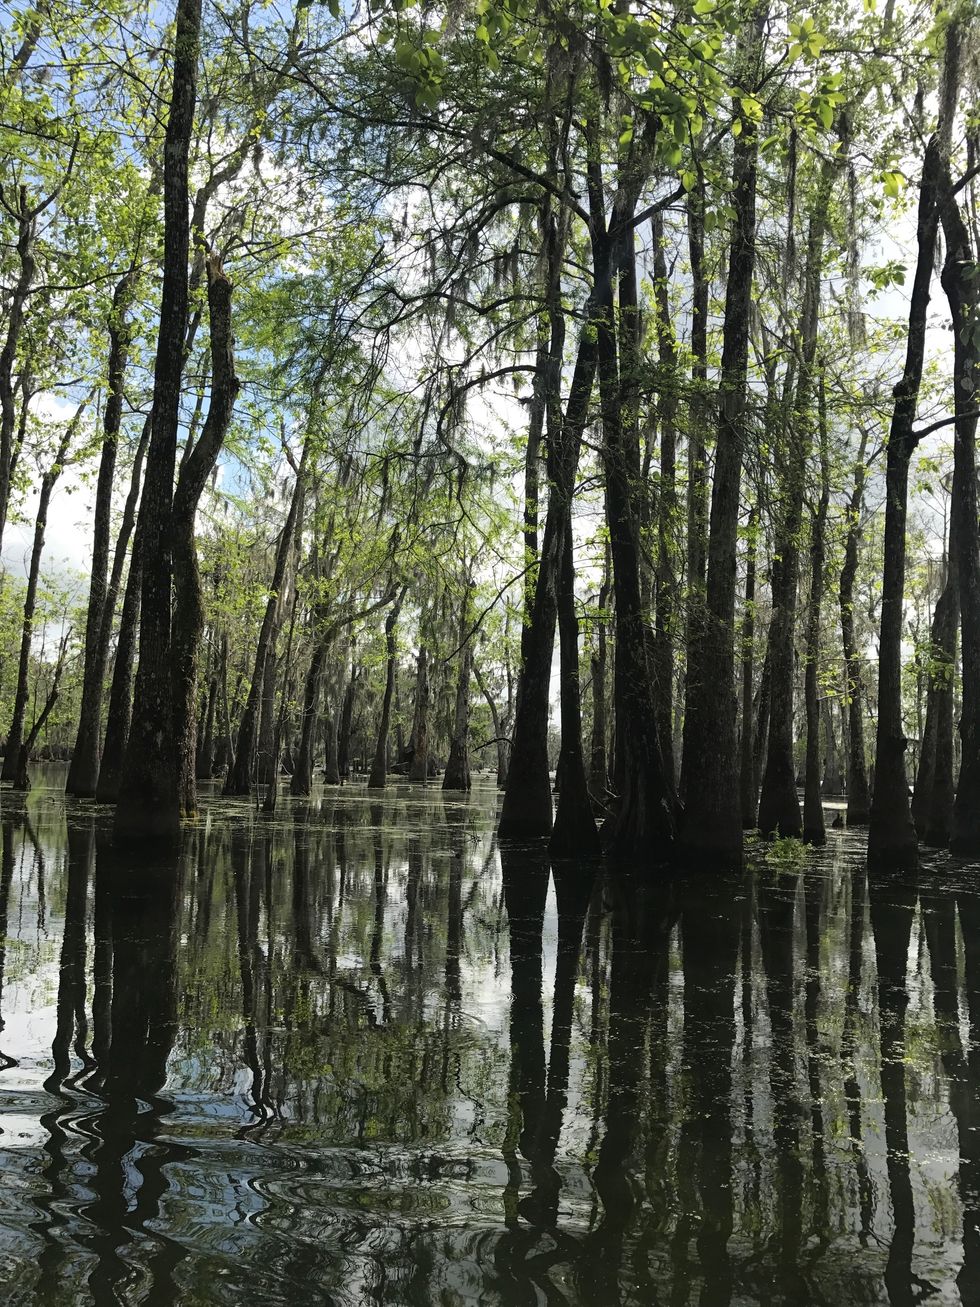 13 Things You Never Knew About Louisiana's Swamps